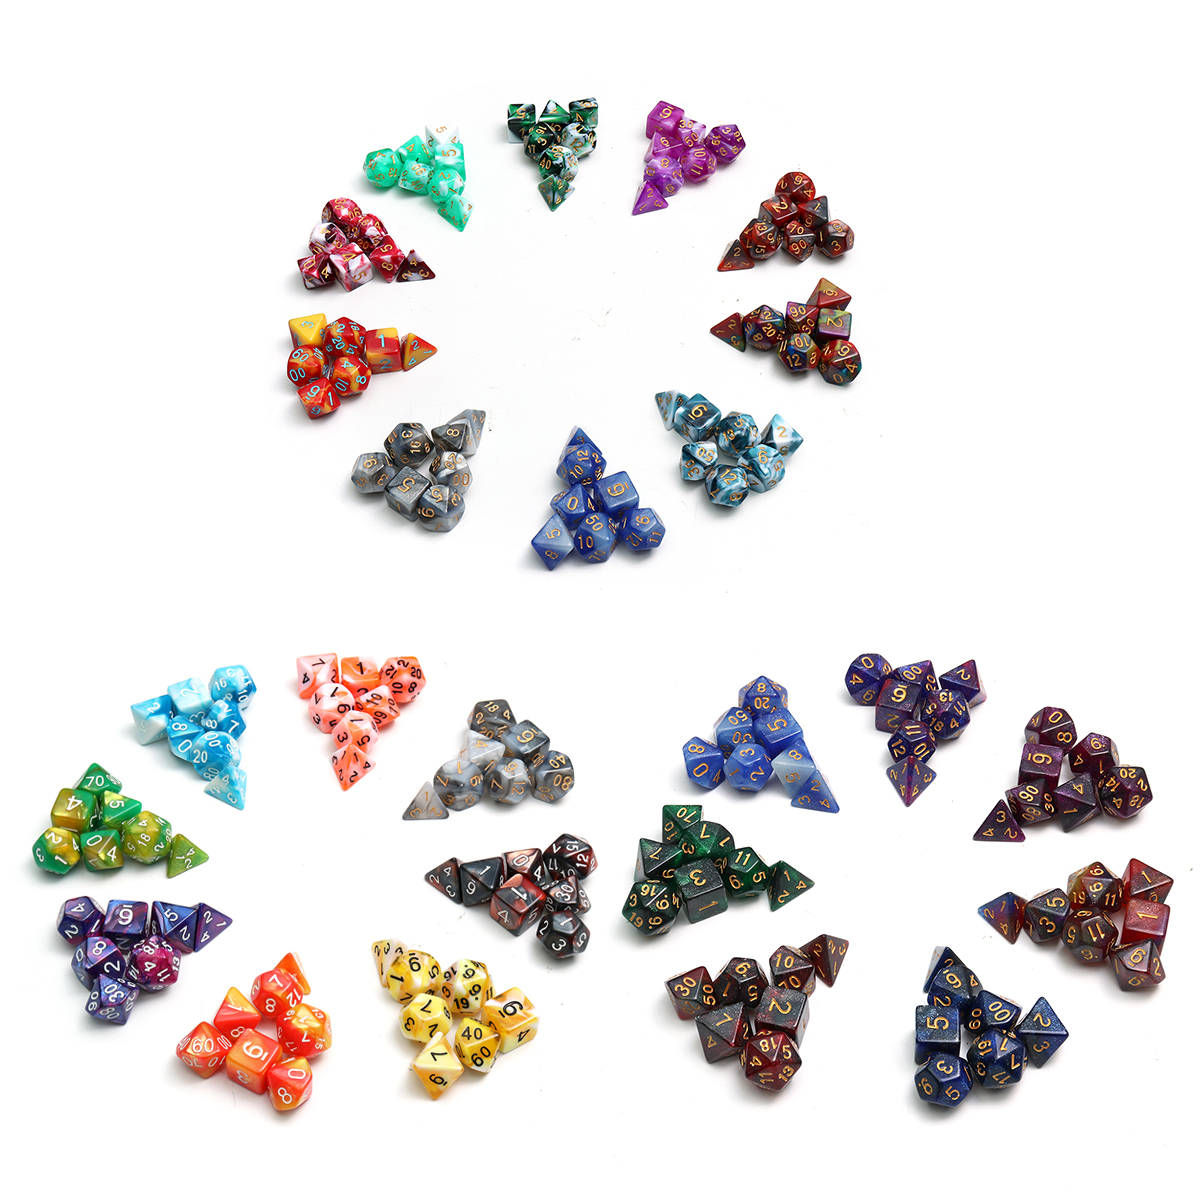 495670Pcs-Polyhedral-Dices-for-Dungeons--Dragons-Desktop-Games-With-Storage-Bags-1646830-10